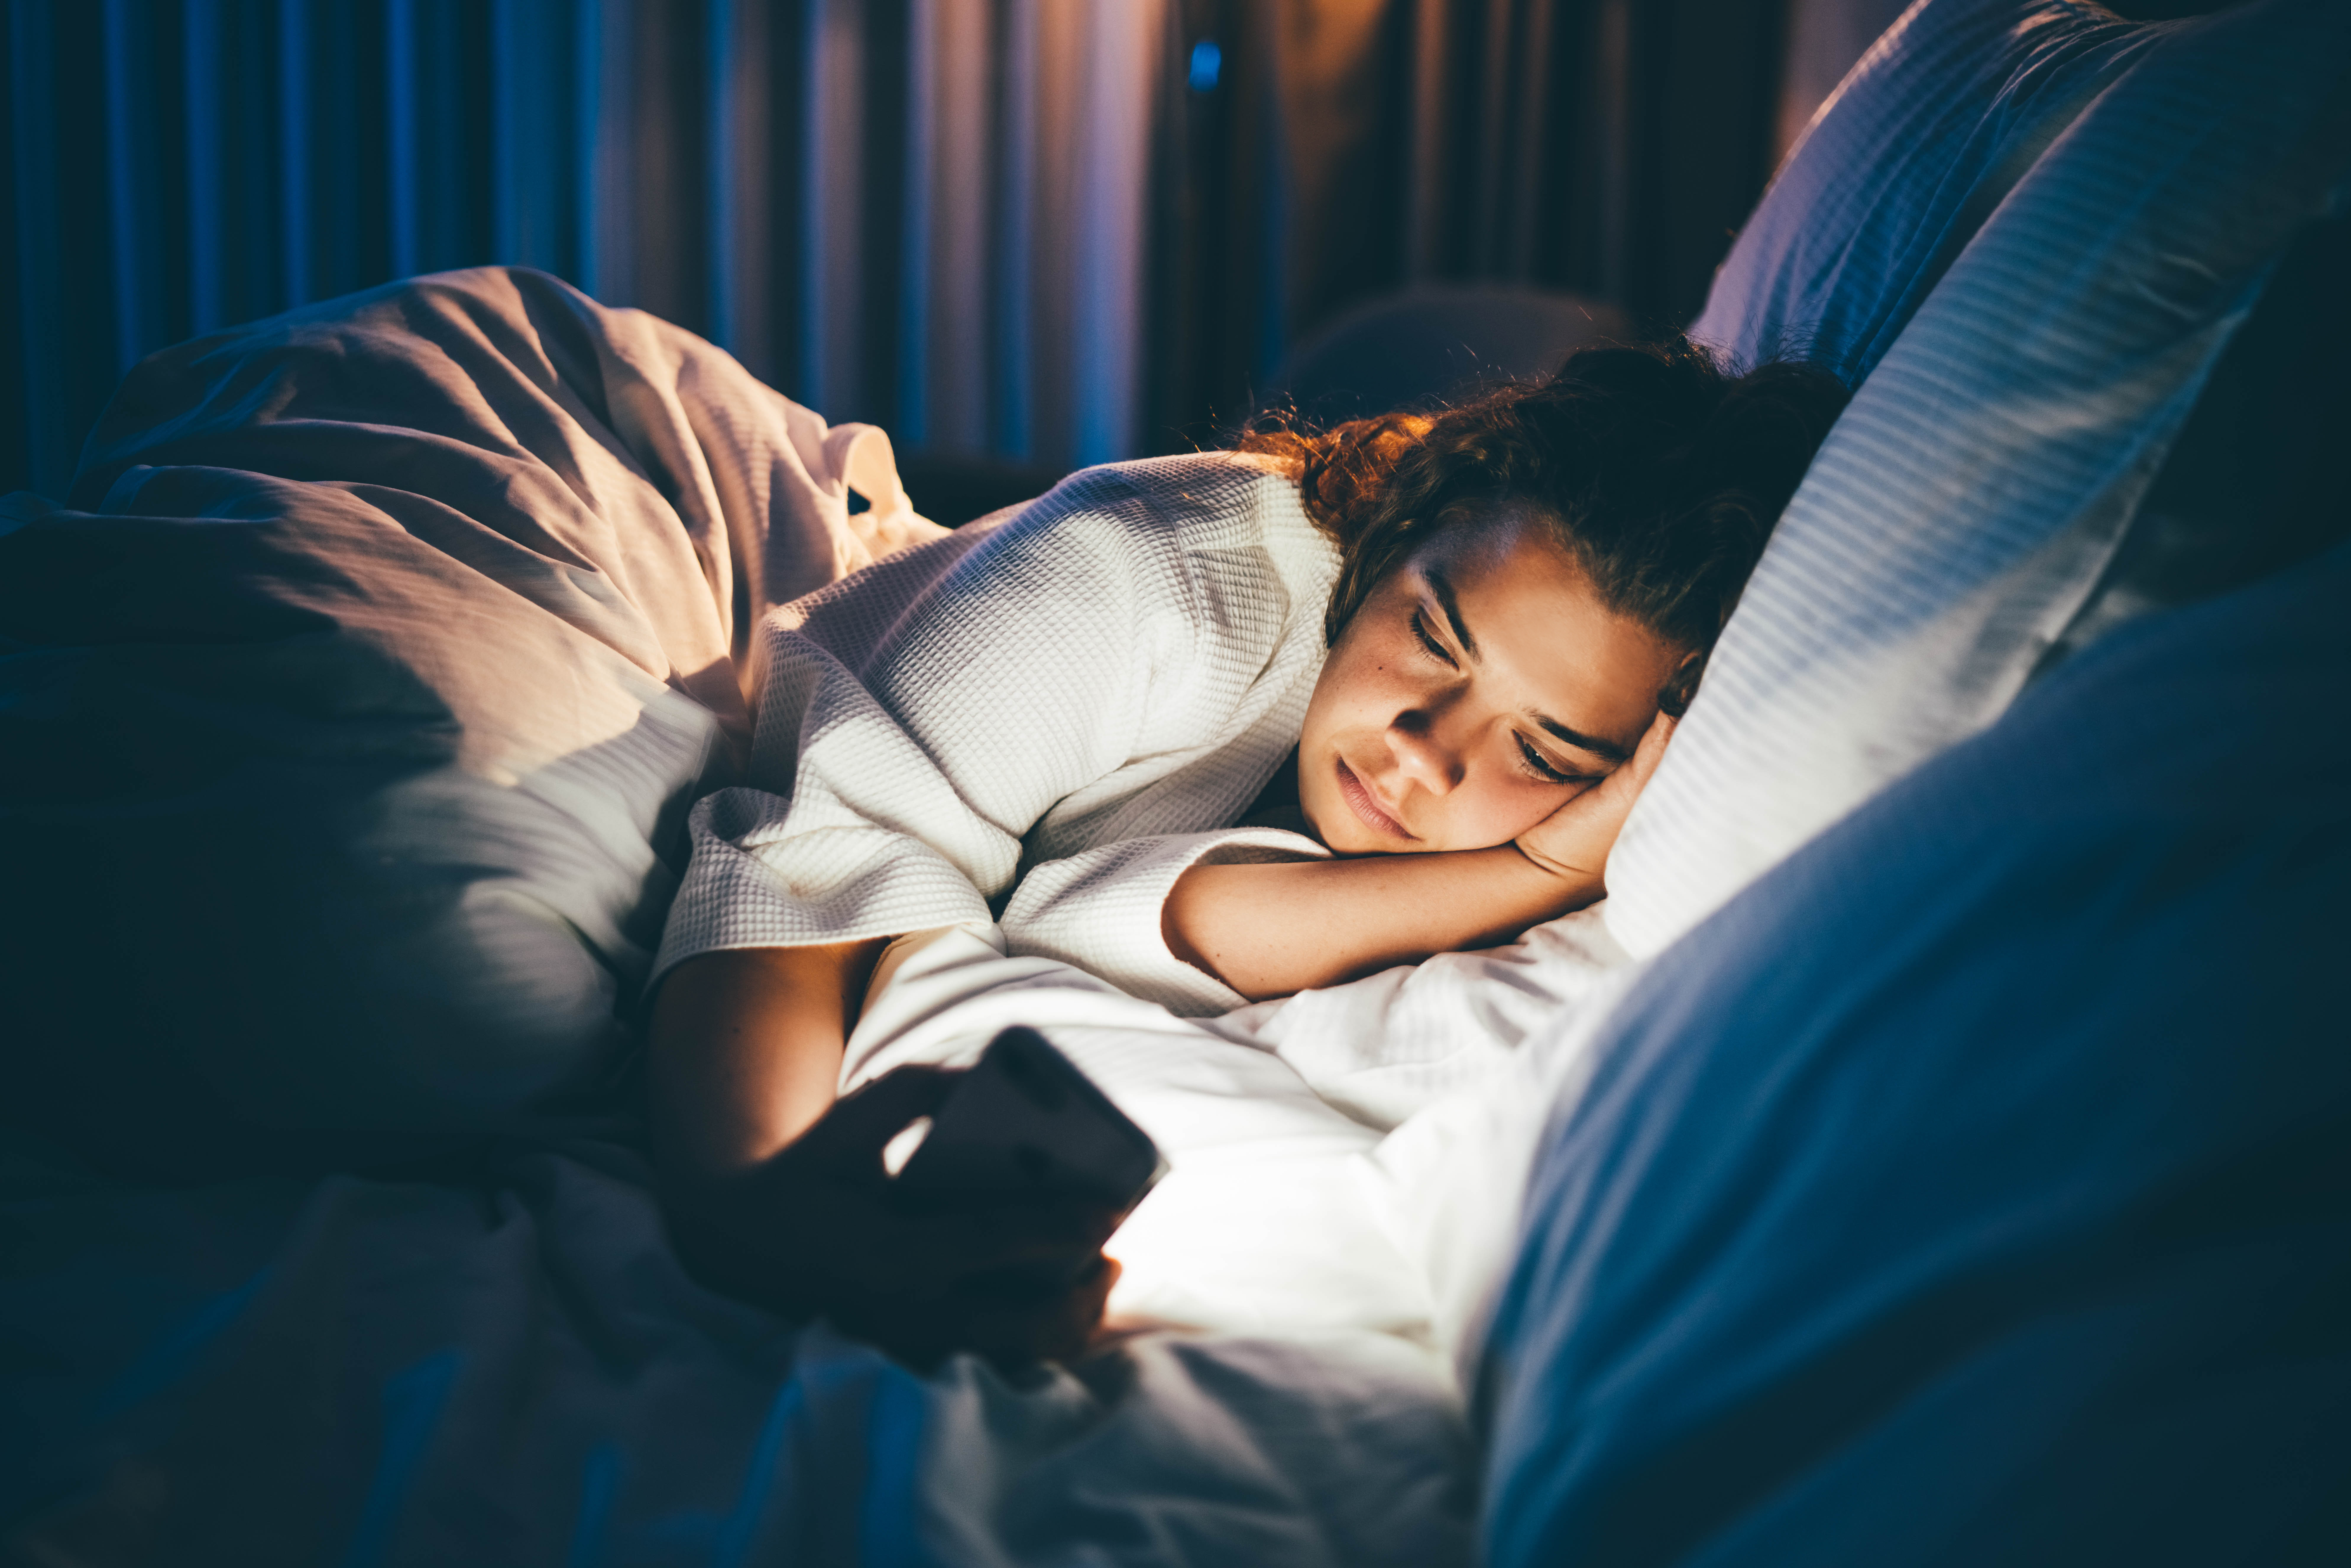 Try to stop screen time around one hour before bedtime